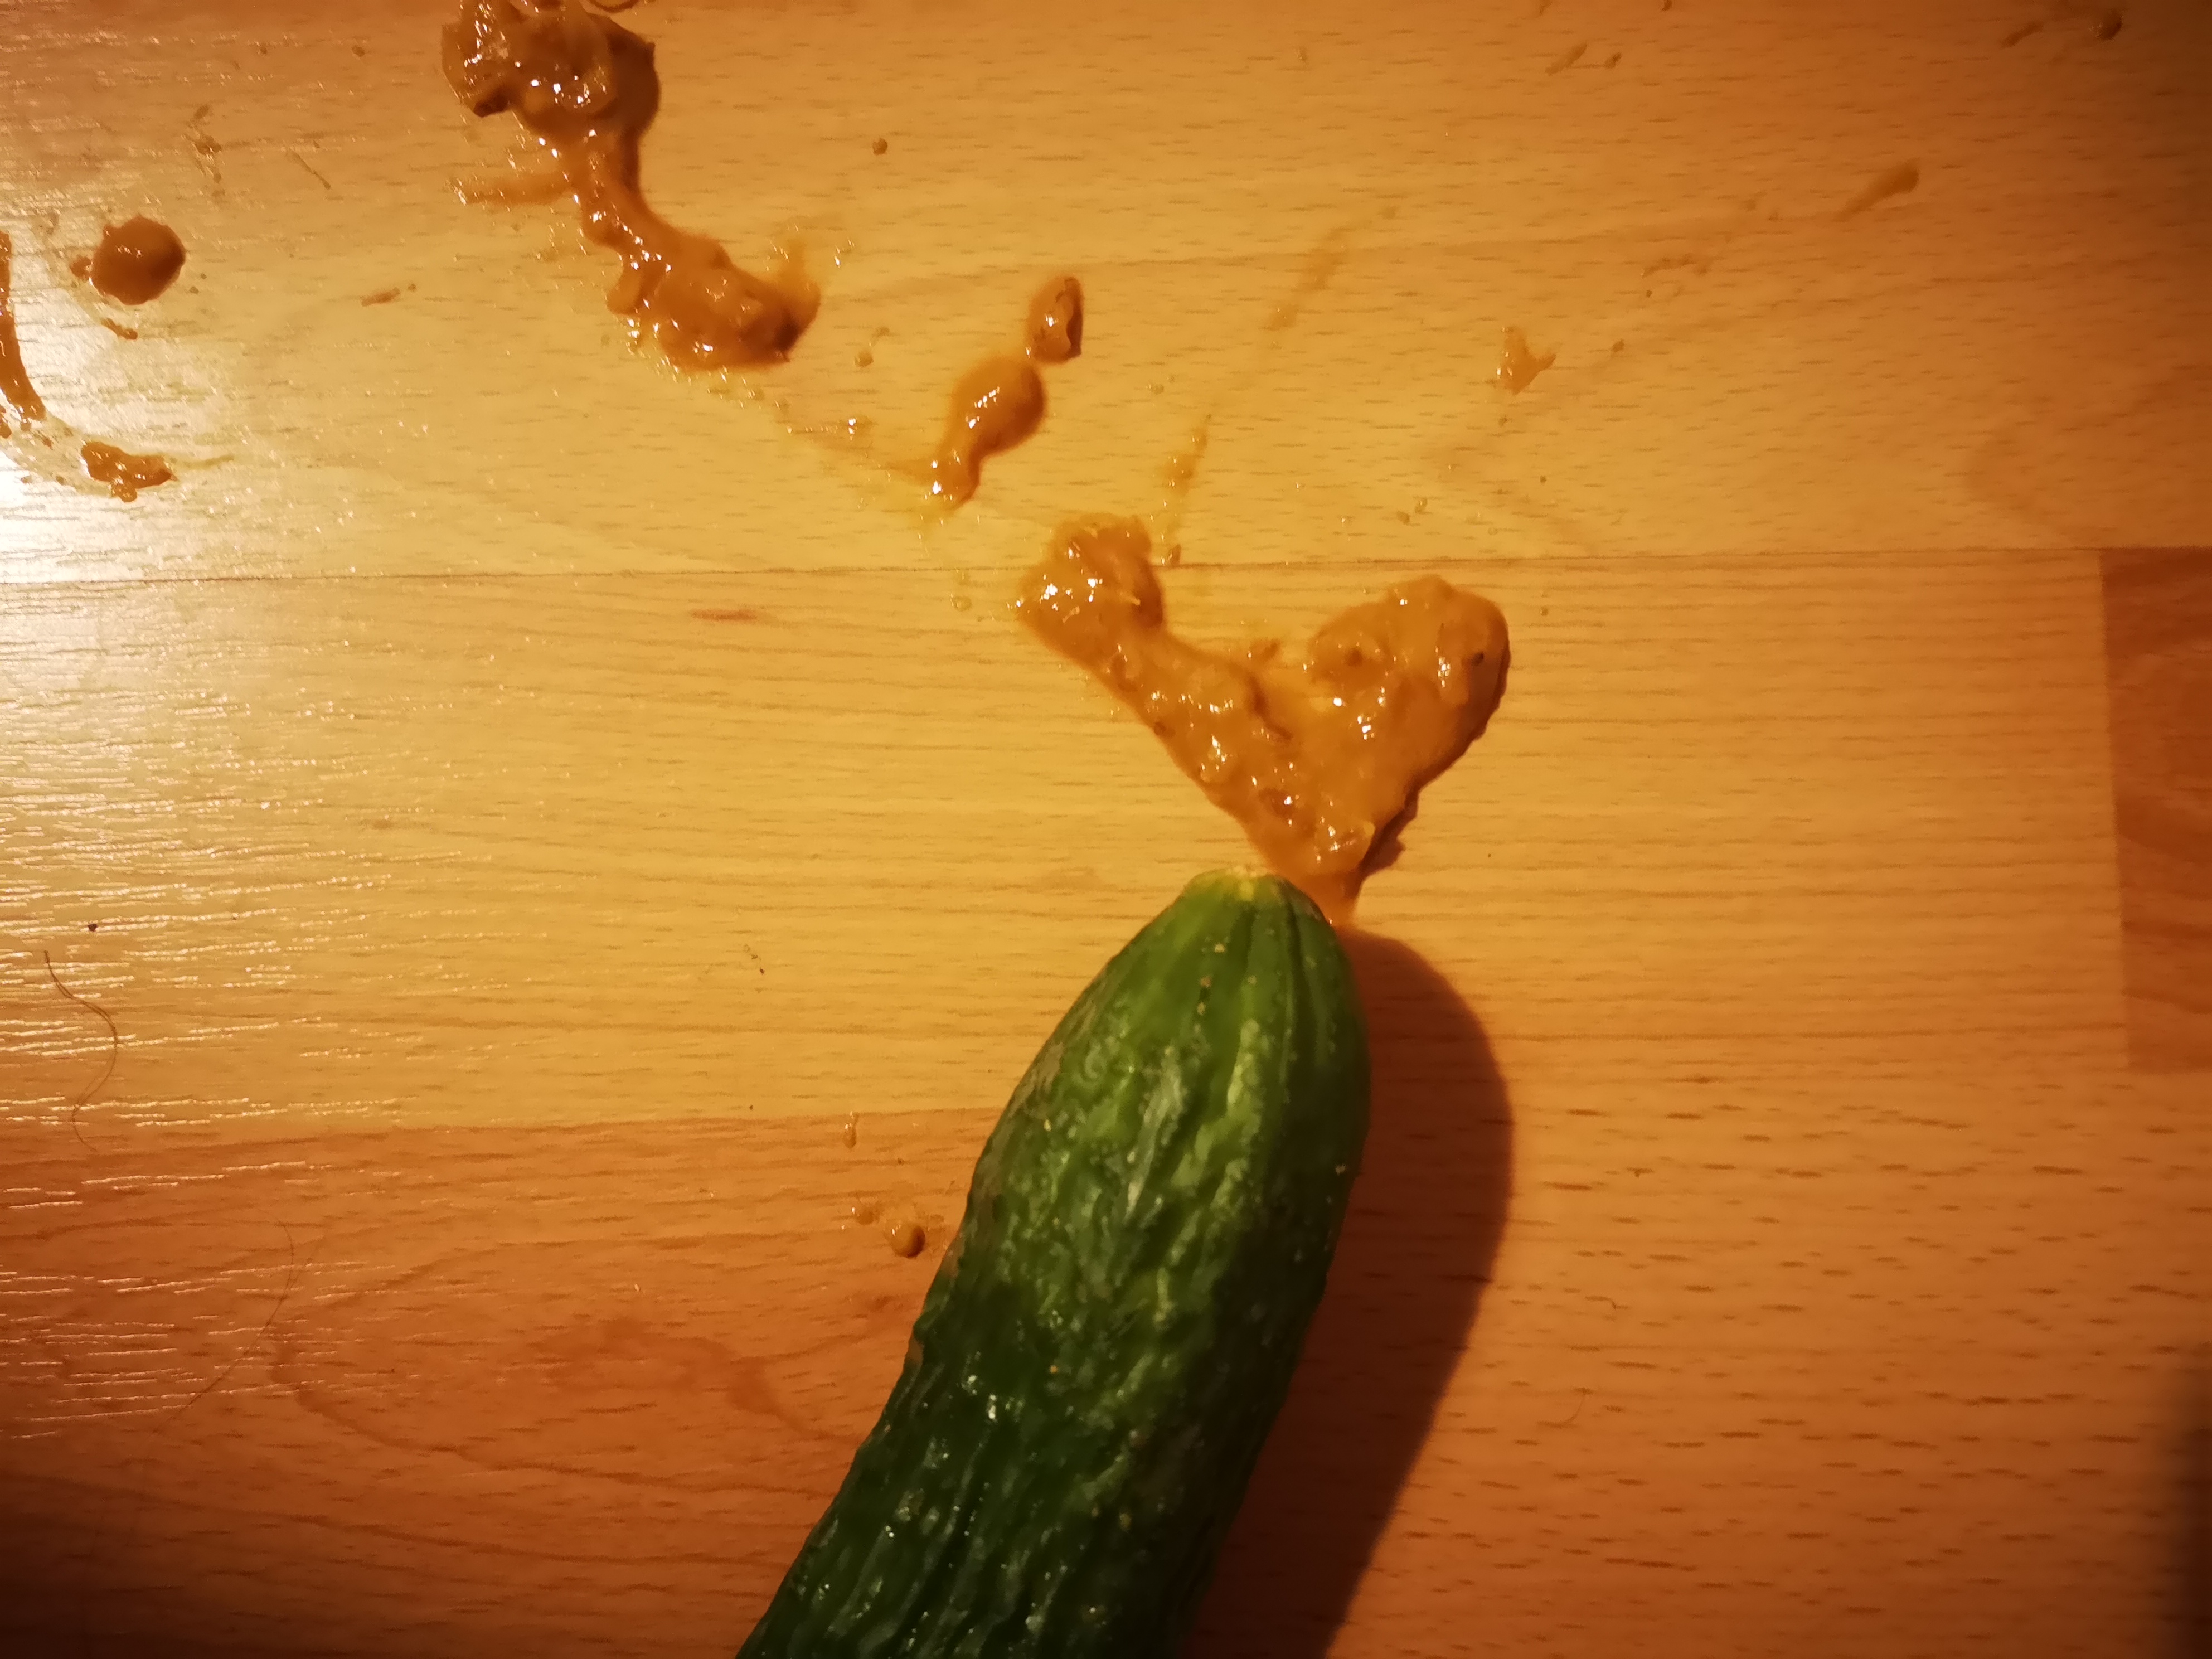 Shitty anal with cucumber pic